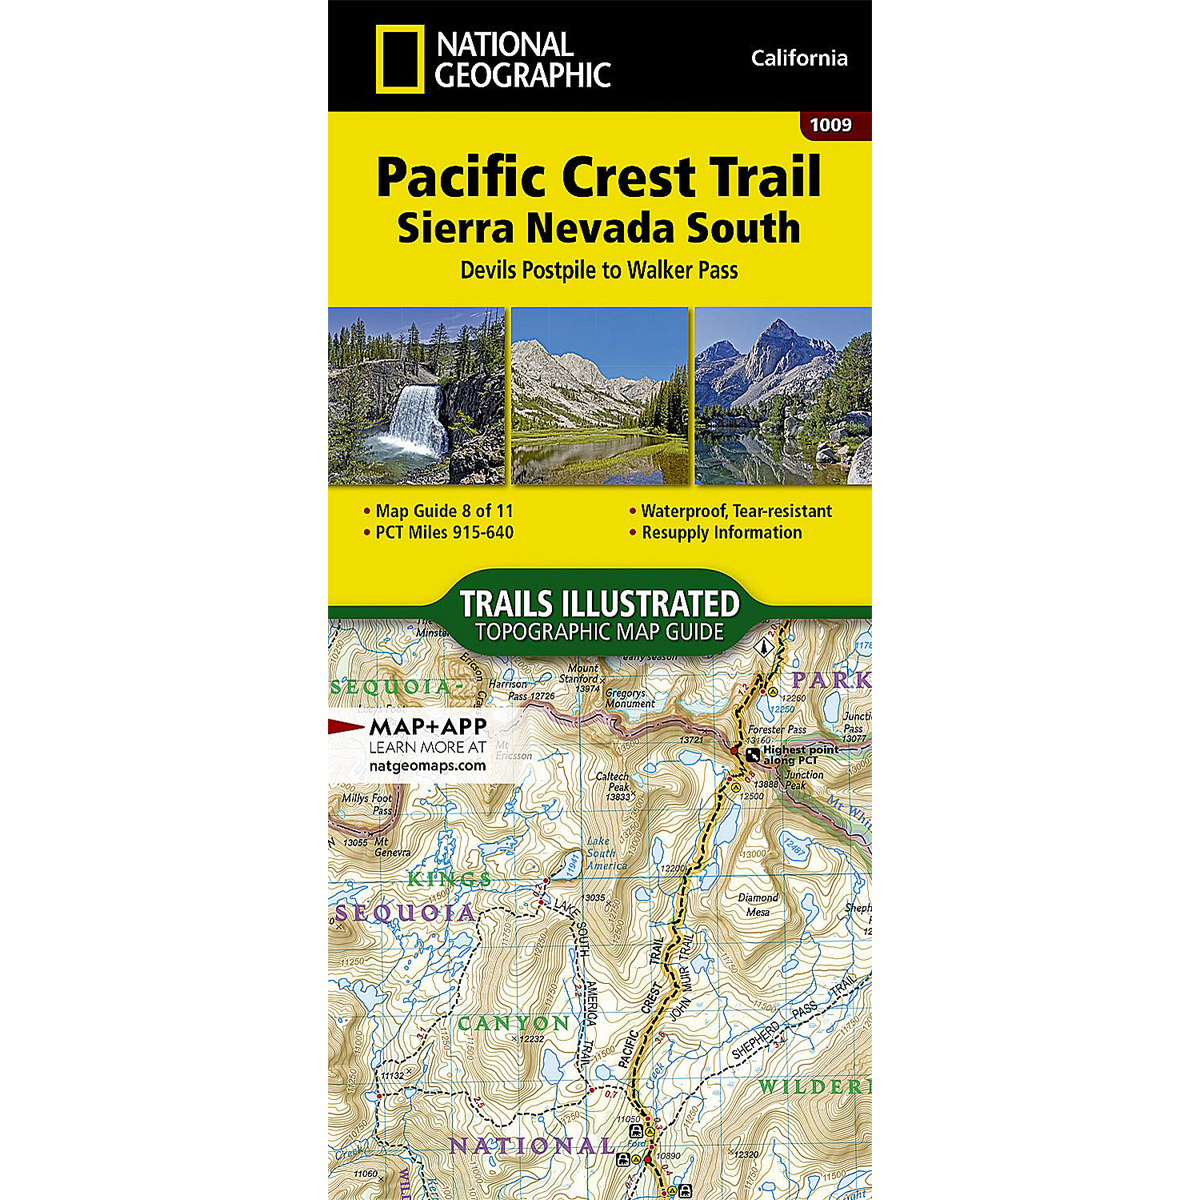 Pacific Crest Trail: Sierra Nevada South Map alternate view